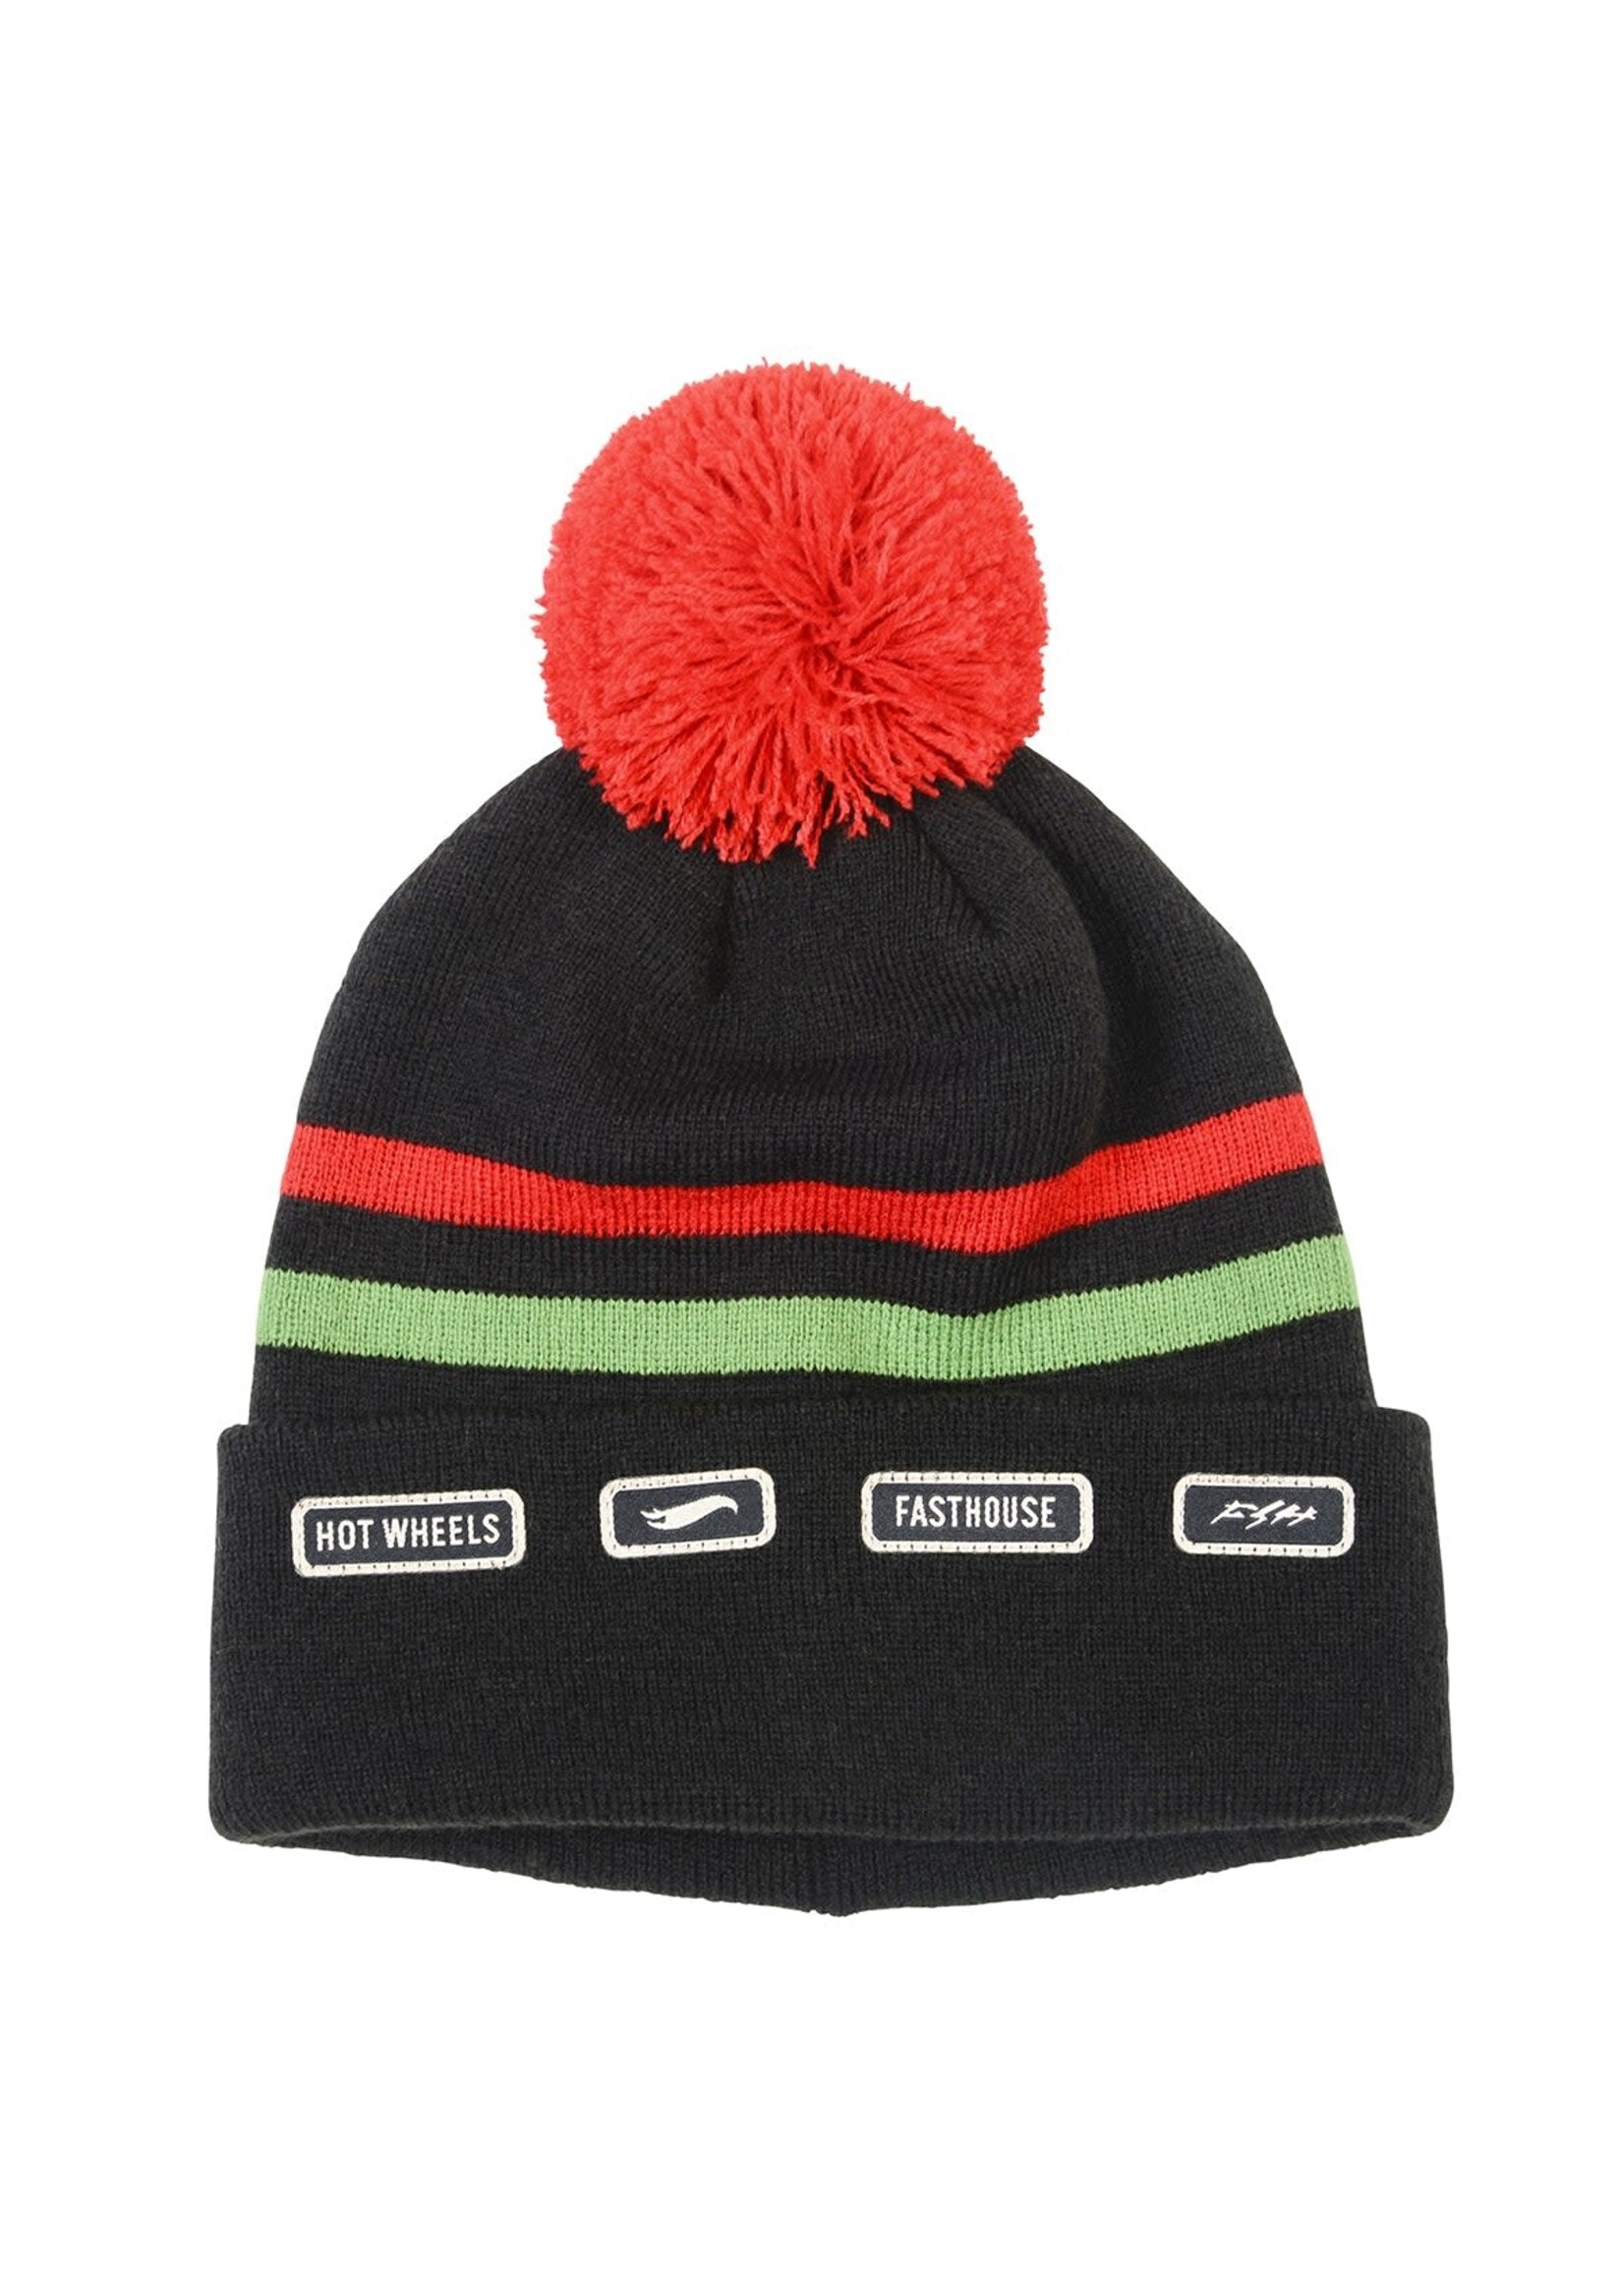 FASTHOUSE Express Hot Wheels Pom Beanie, Black/Red OS